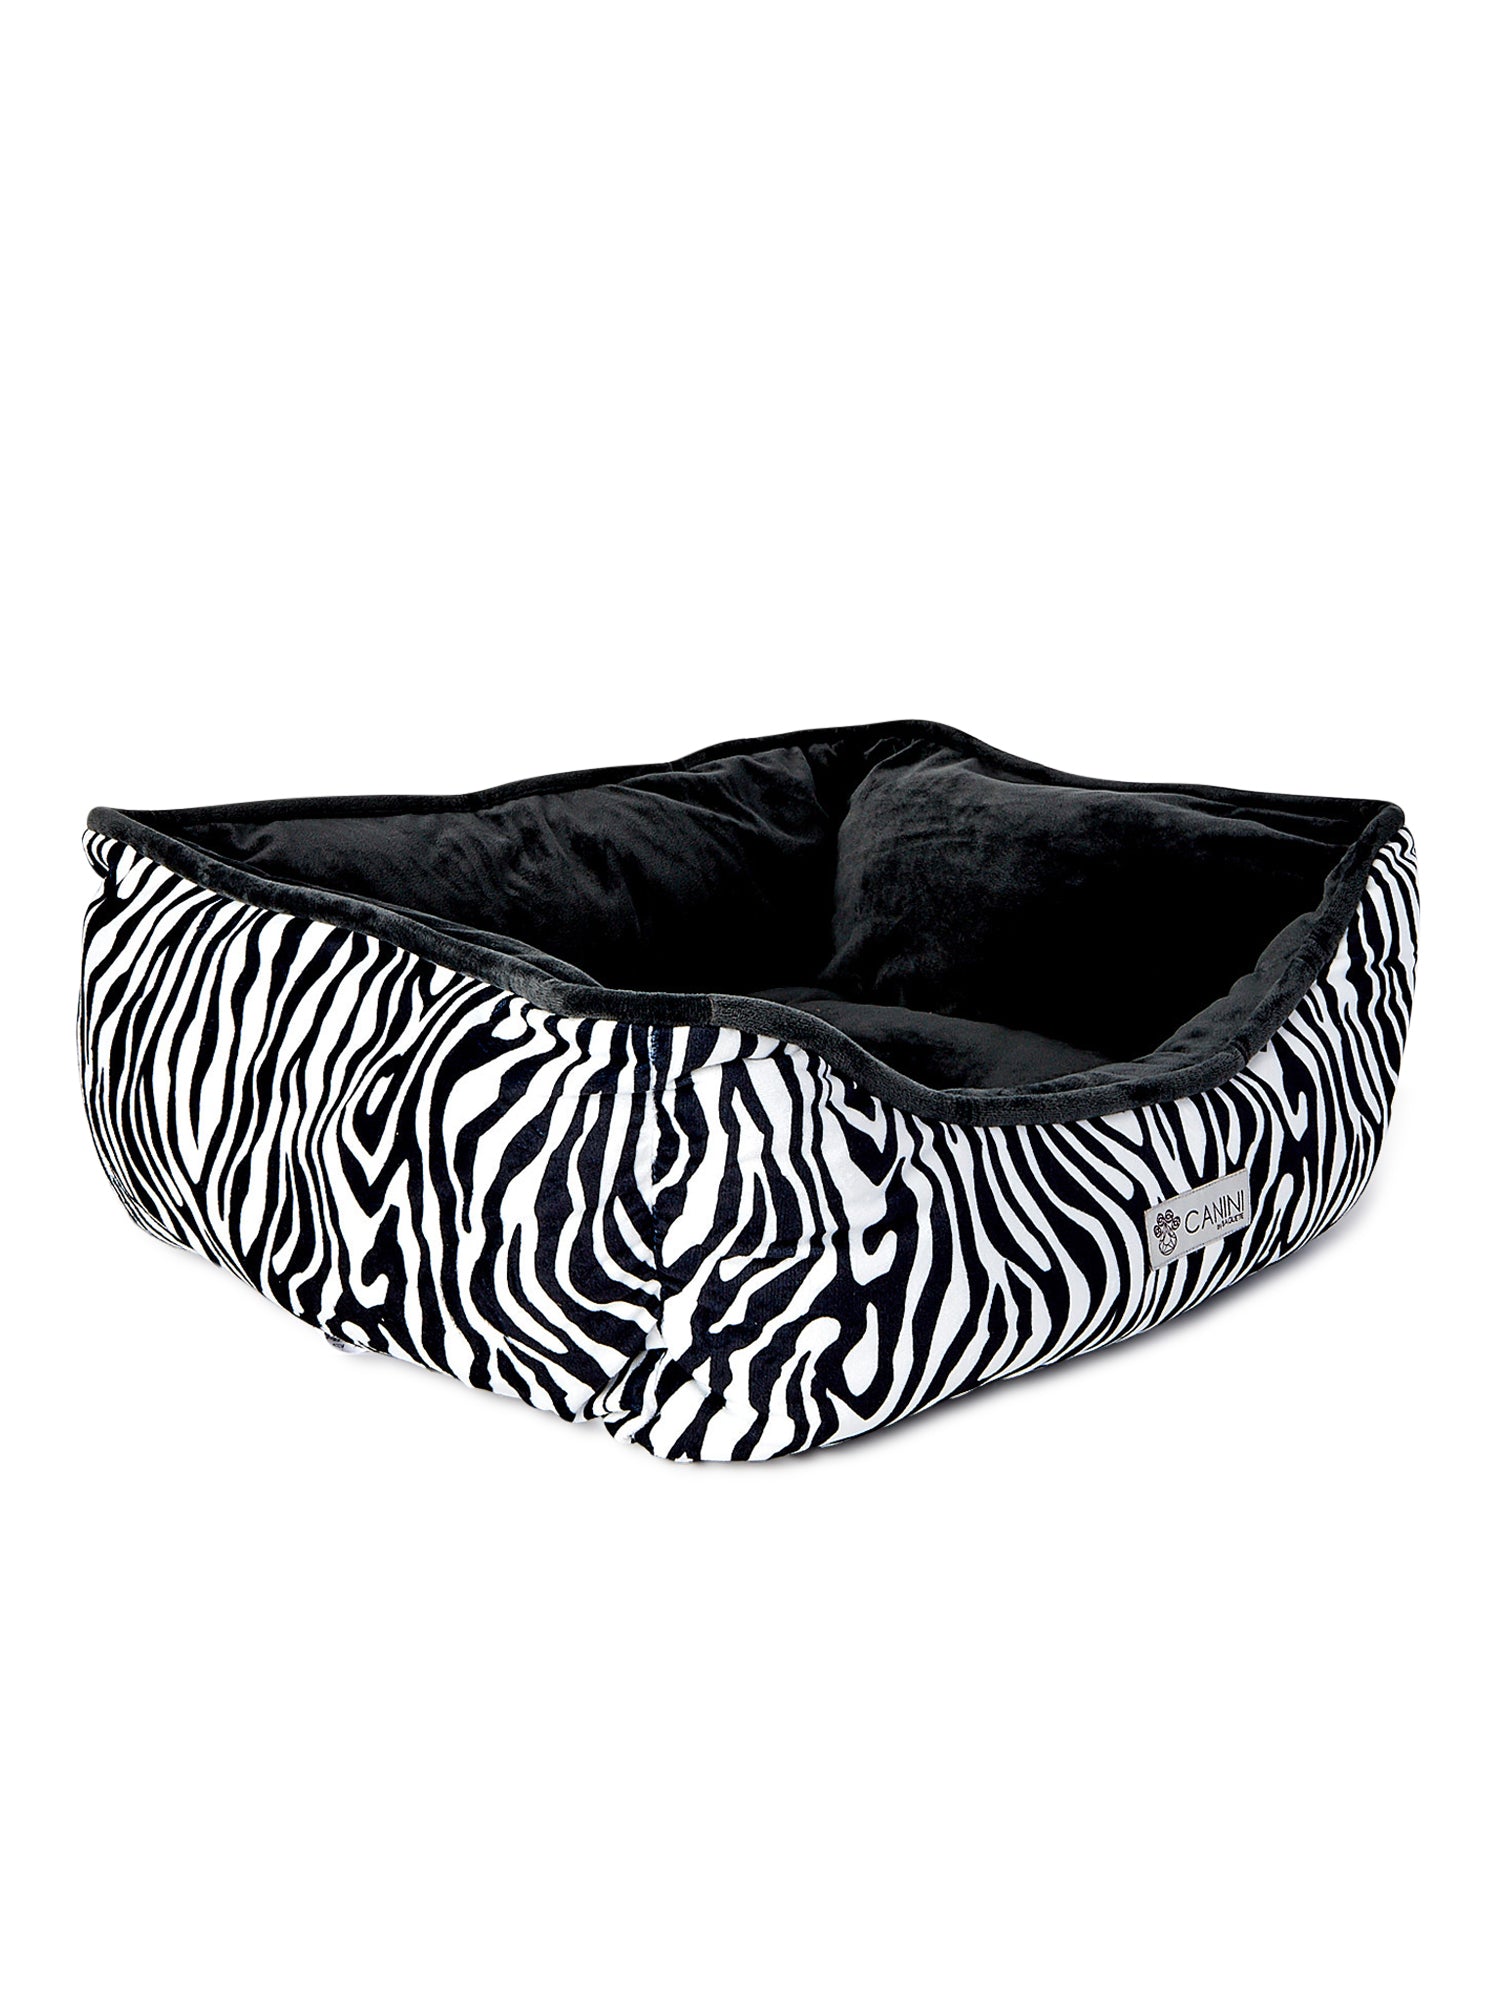 CANINI by Baguette Reversible Micro-Plush Dog Bed for Small-Sized Breeds， Zebra Print